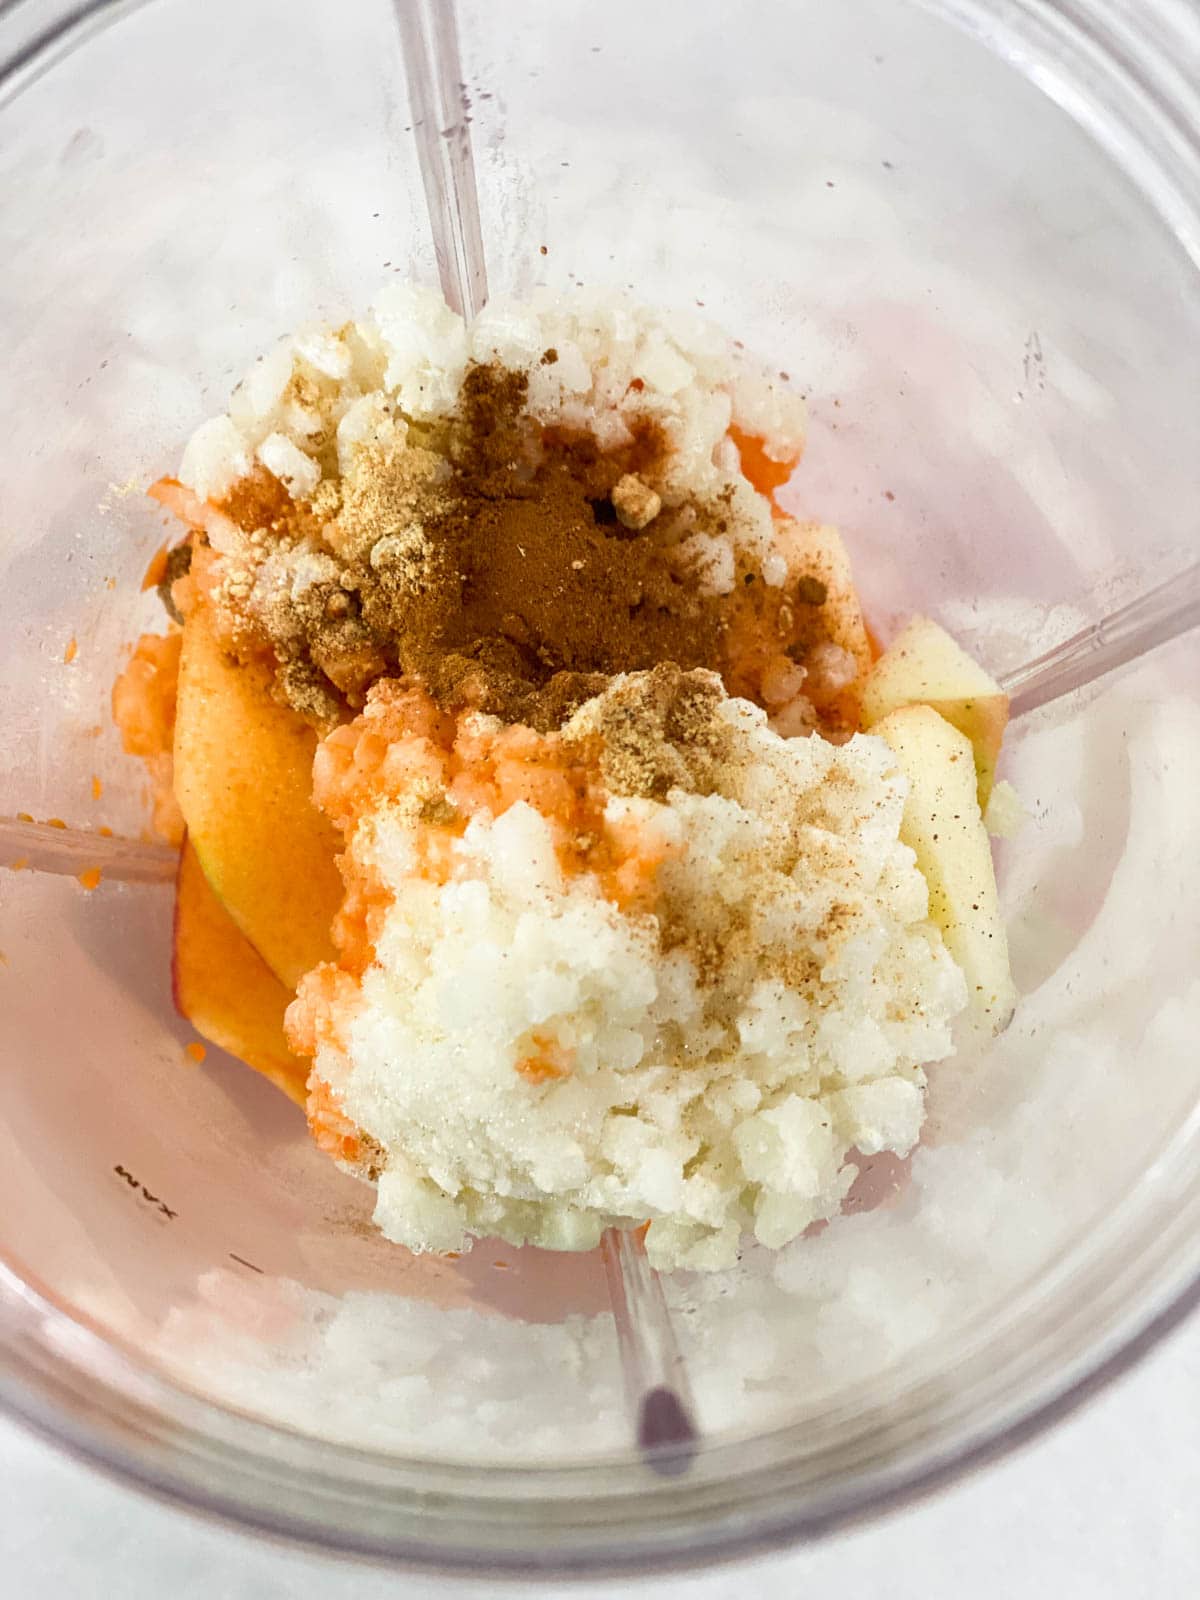 Carrots, cauliflower, spices, and apples in a blender.